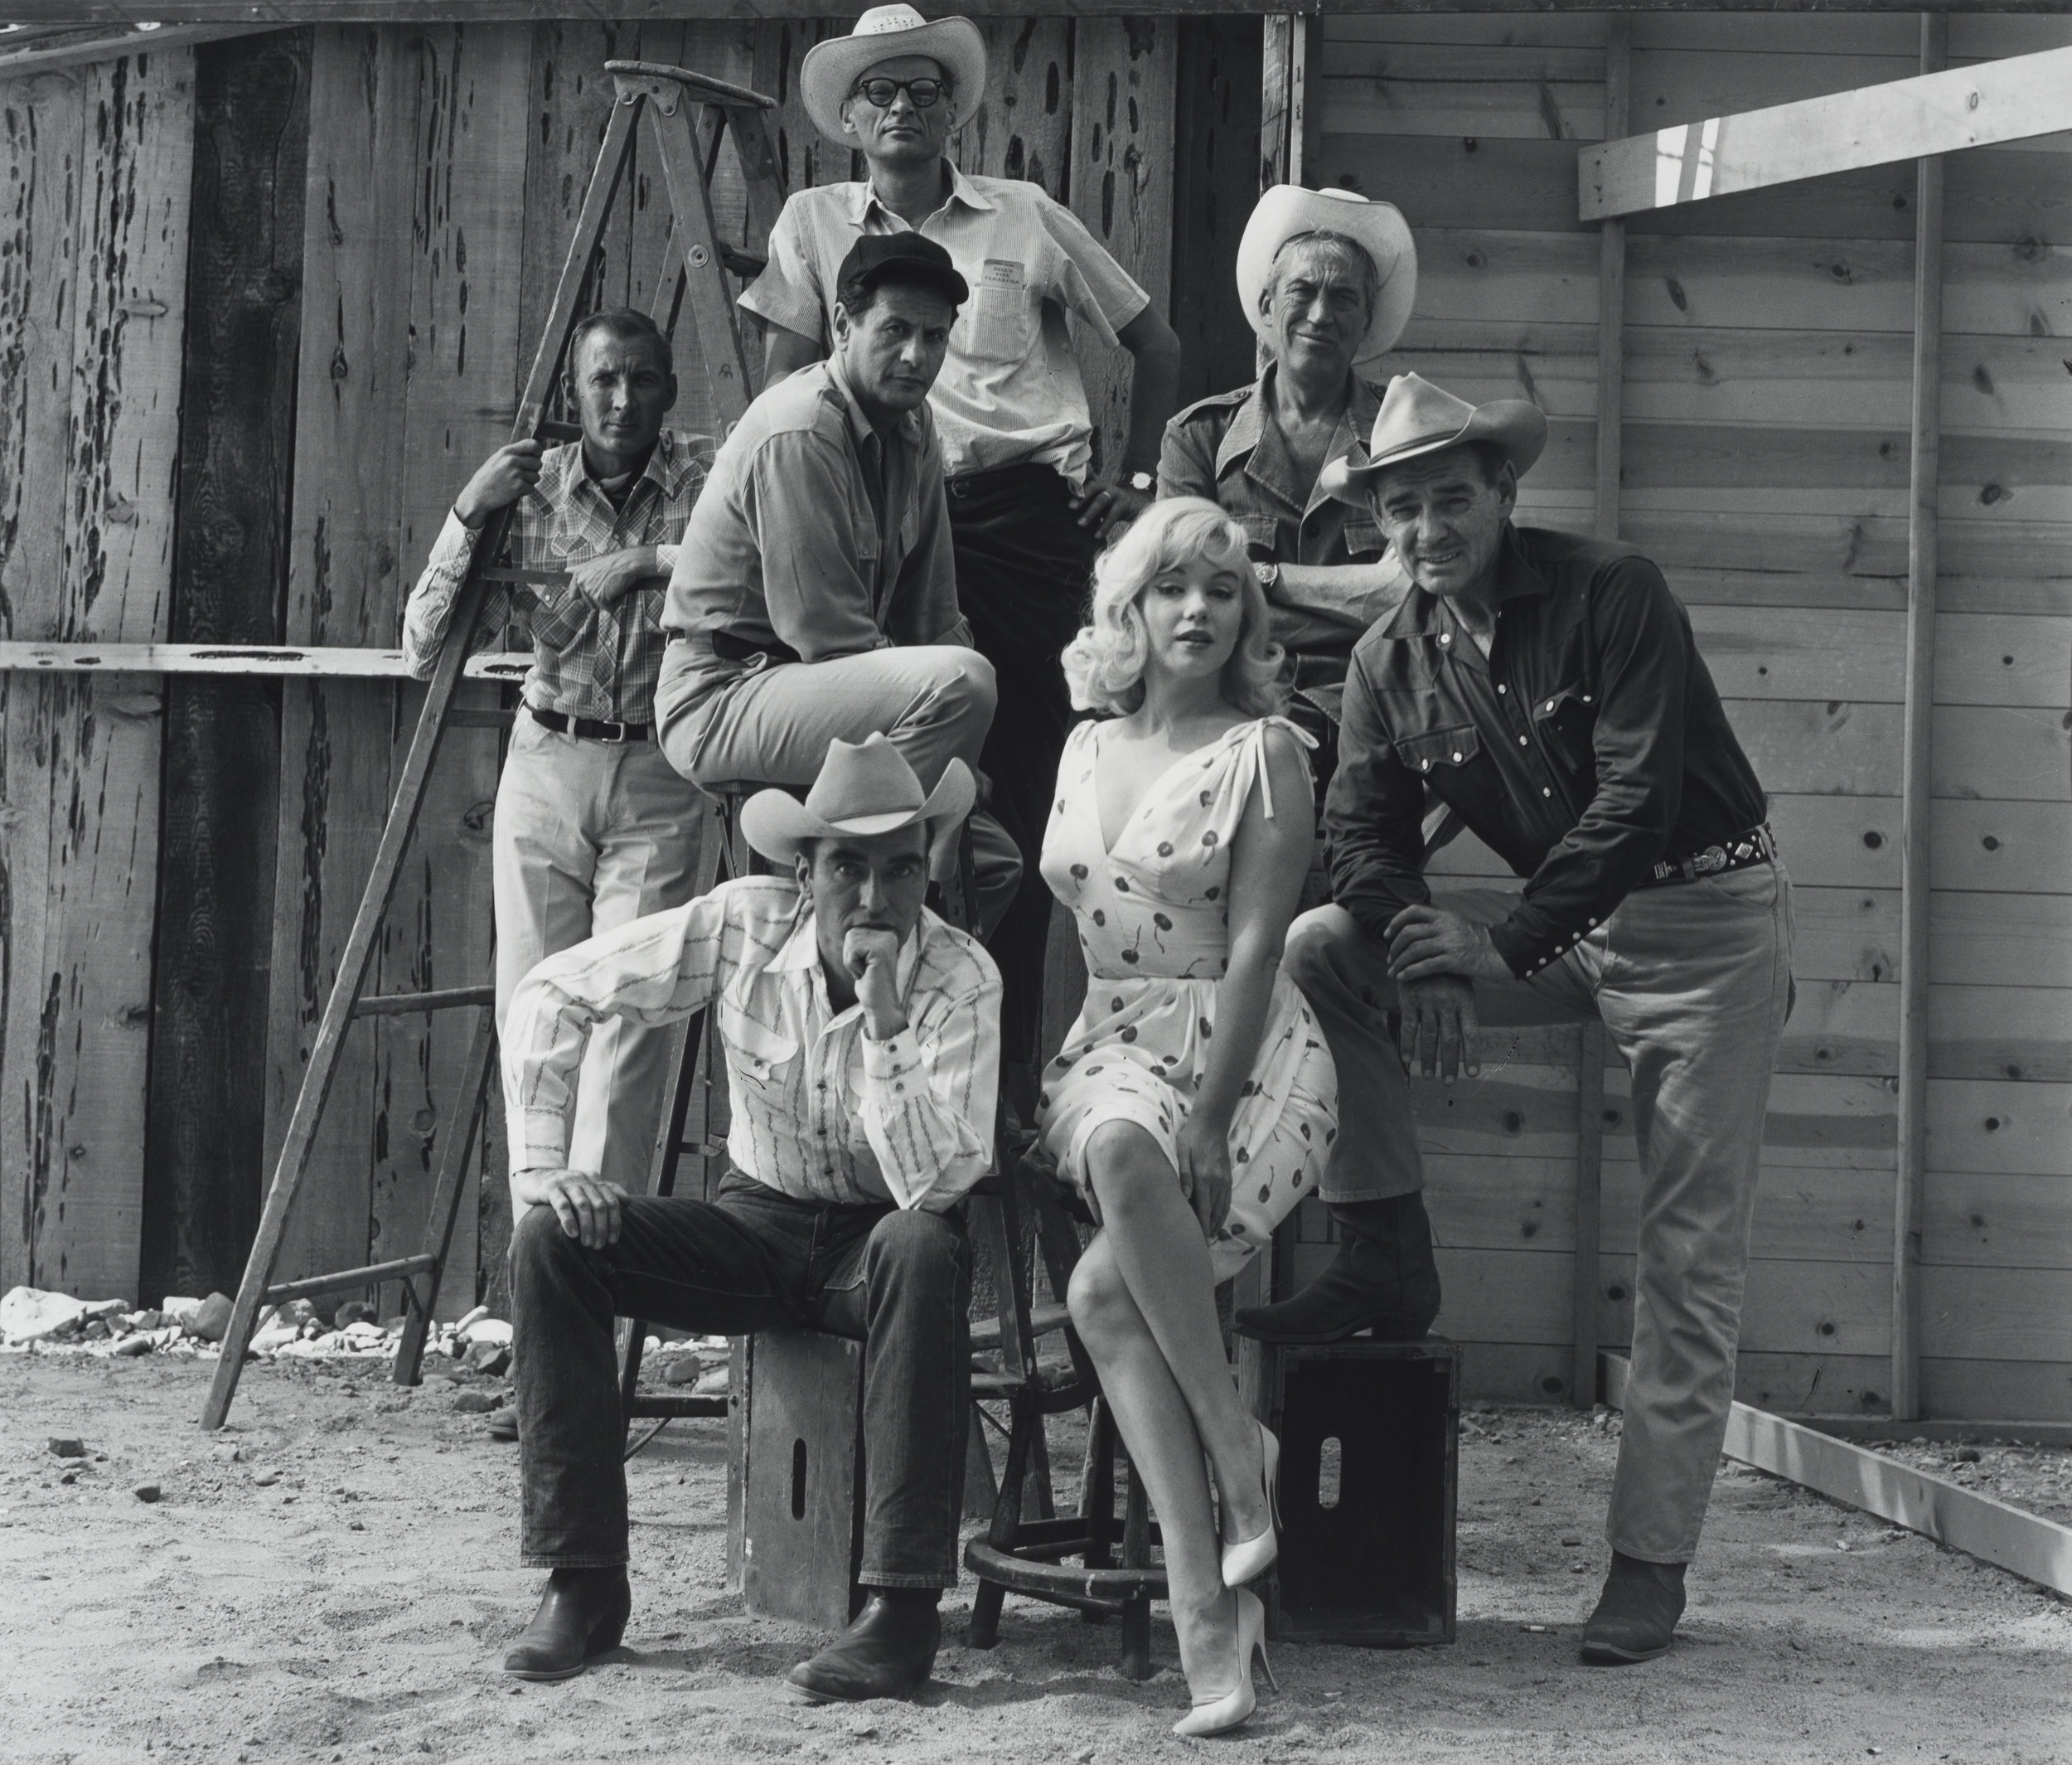 Marilyn Monroe and Cast of "The Misfits", 1950s